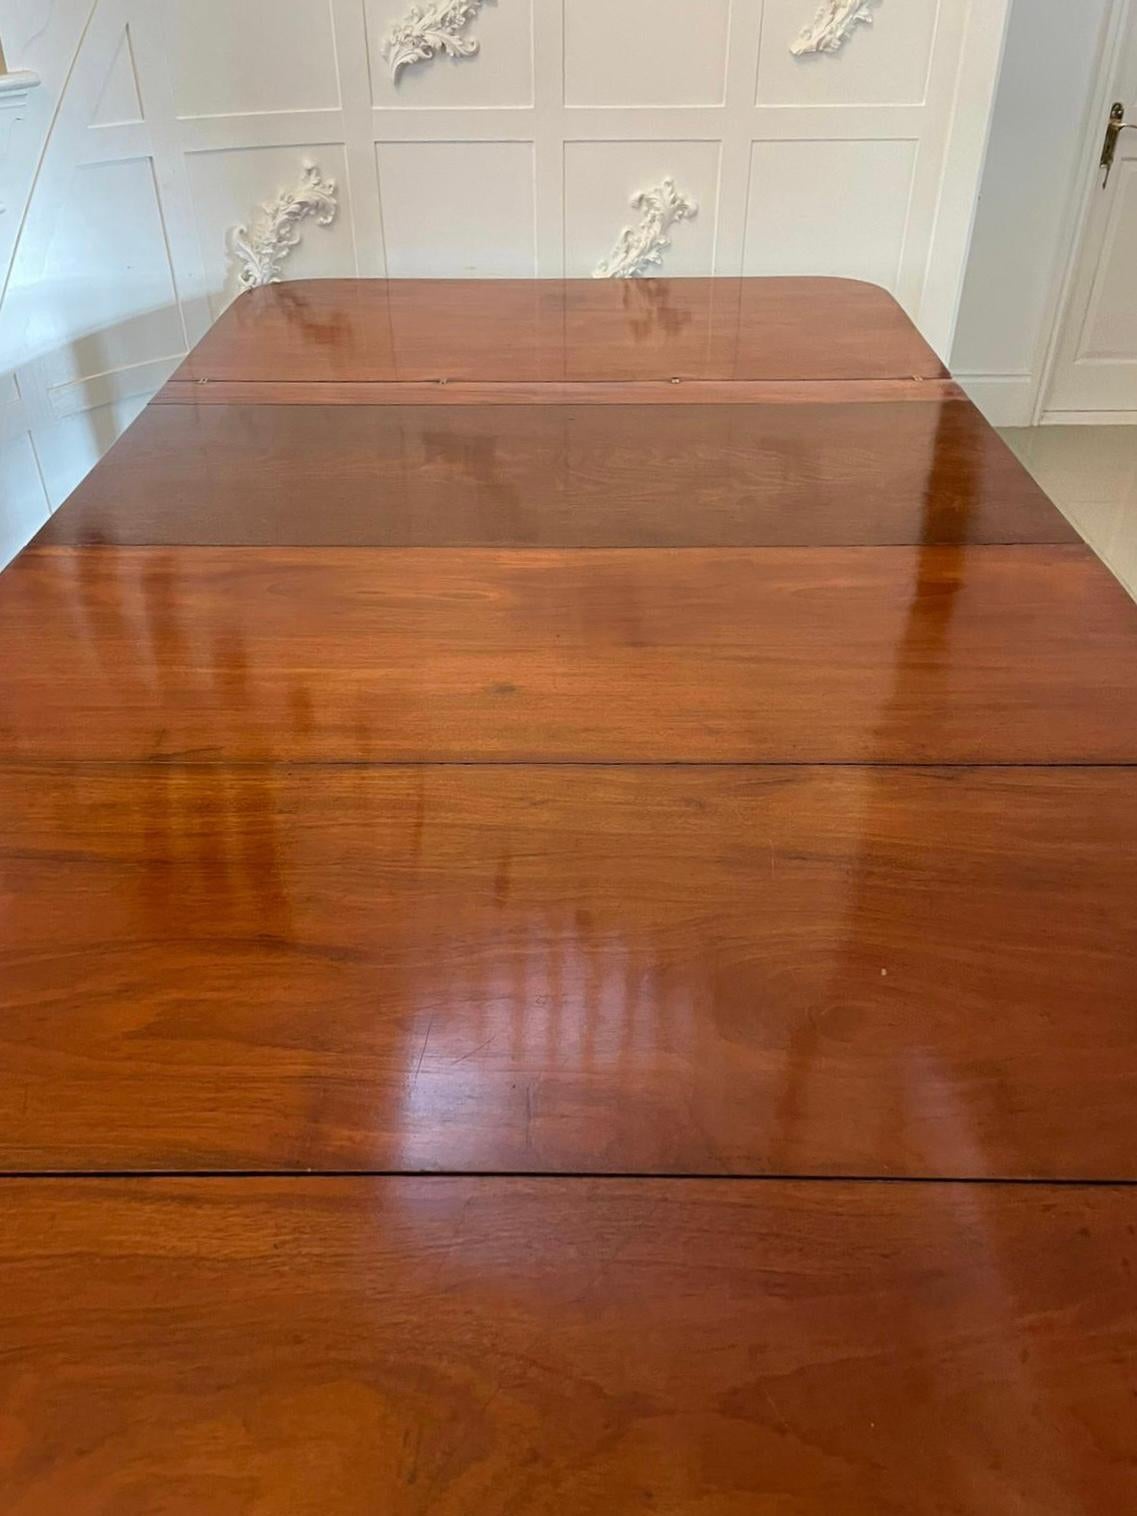 Other Rare Metamorphic Antique George III Quality Mahogany Extending Dining Table For Sale